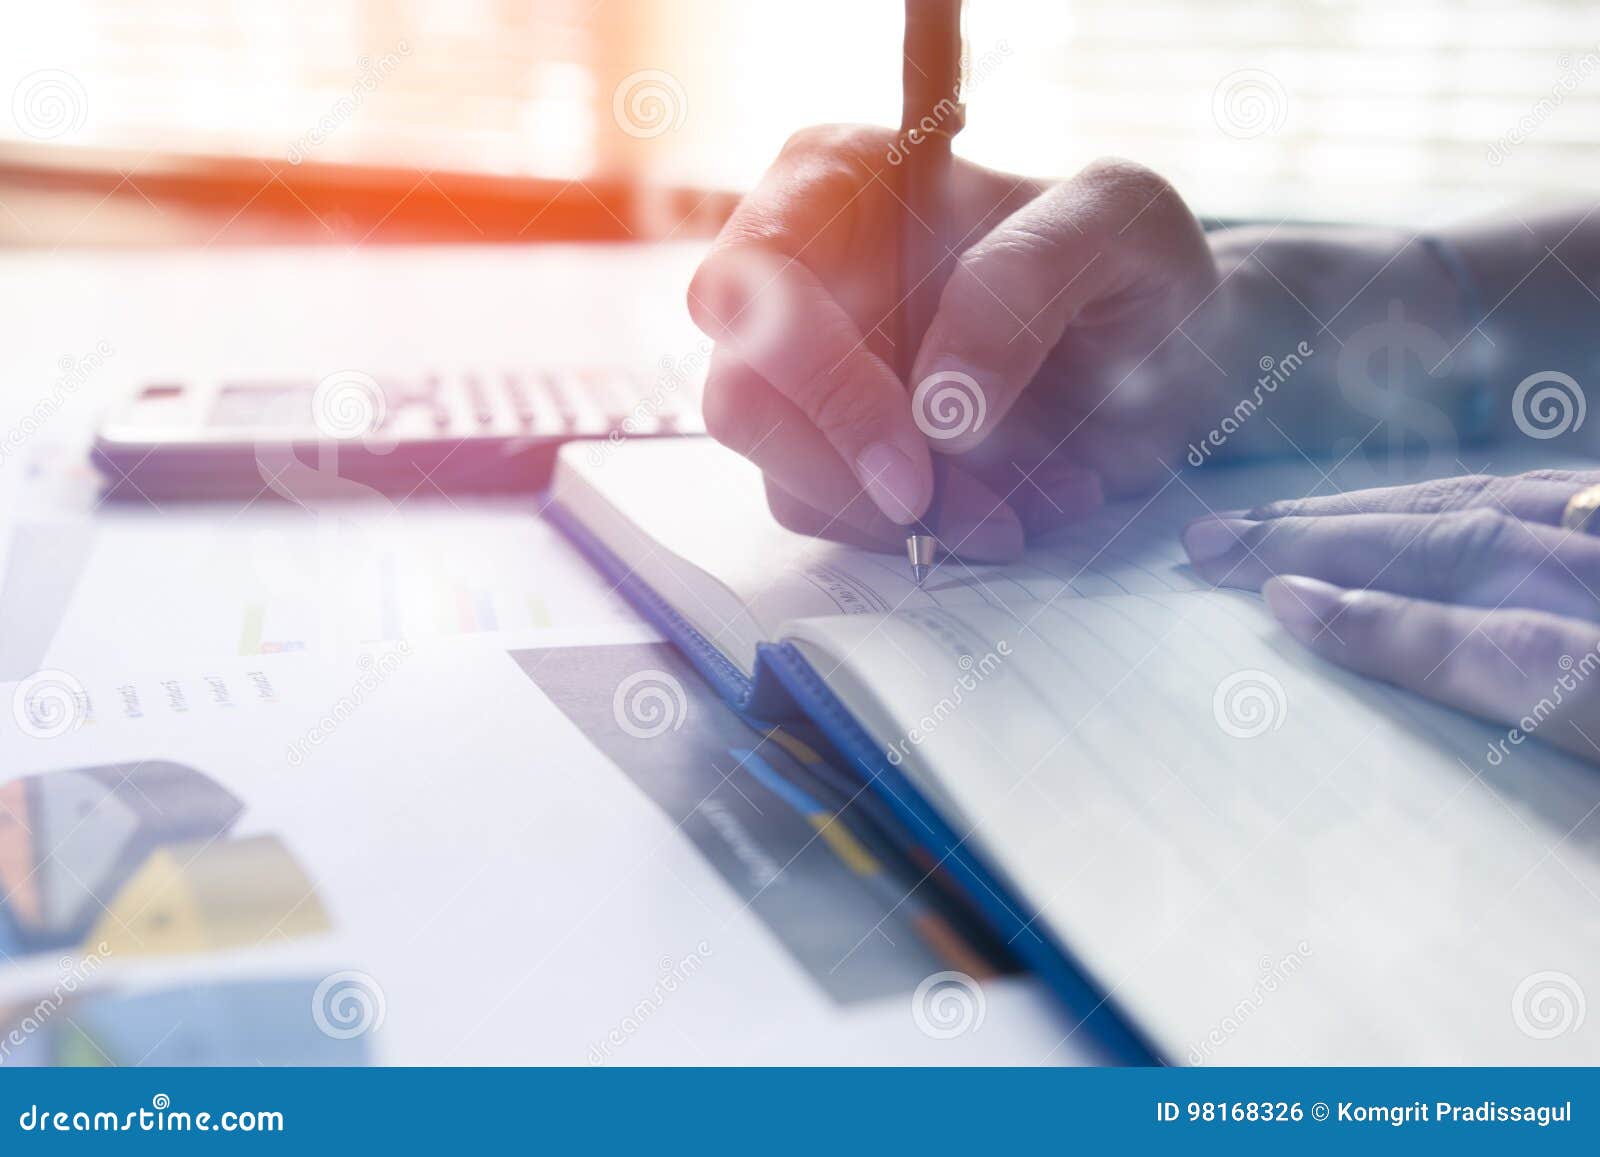 businessman writing on notebook on wooden table, people are recording accounting data calculated from a calculator.